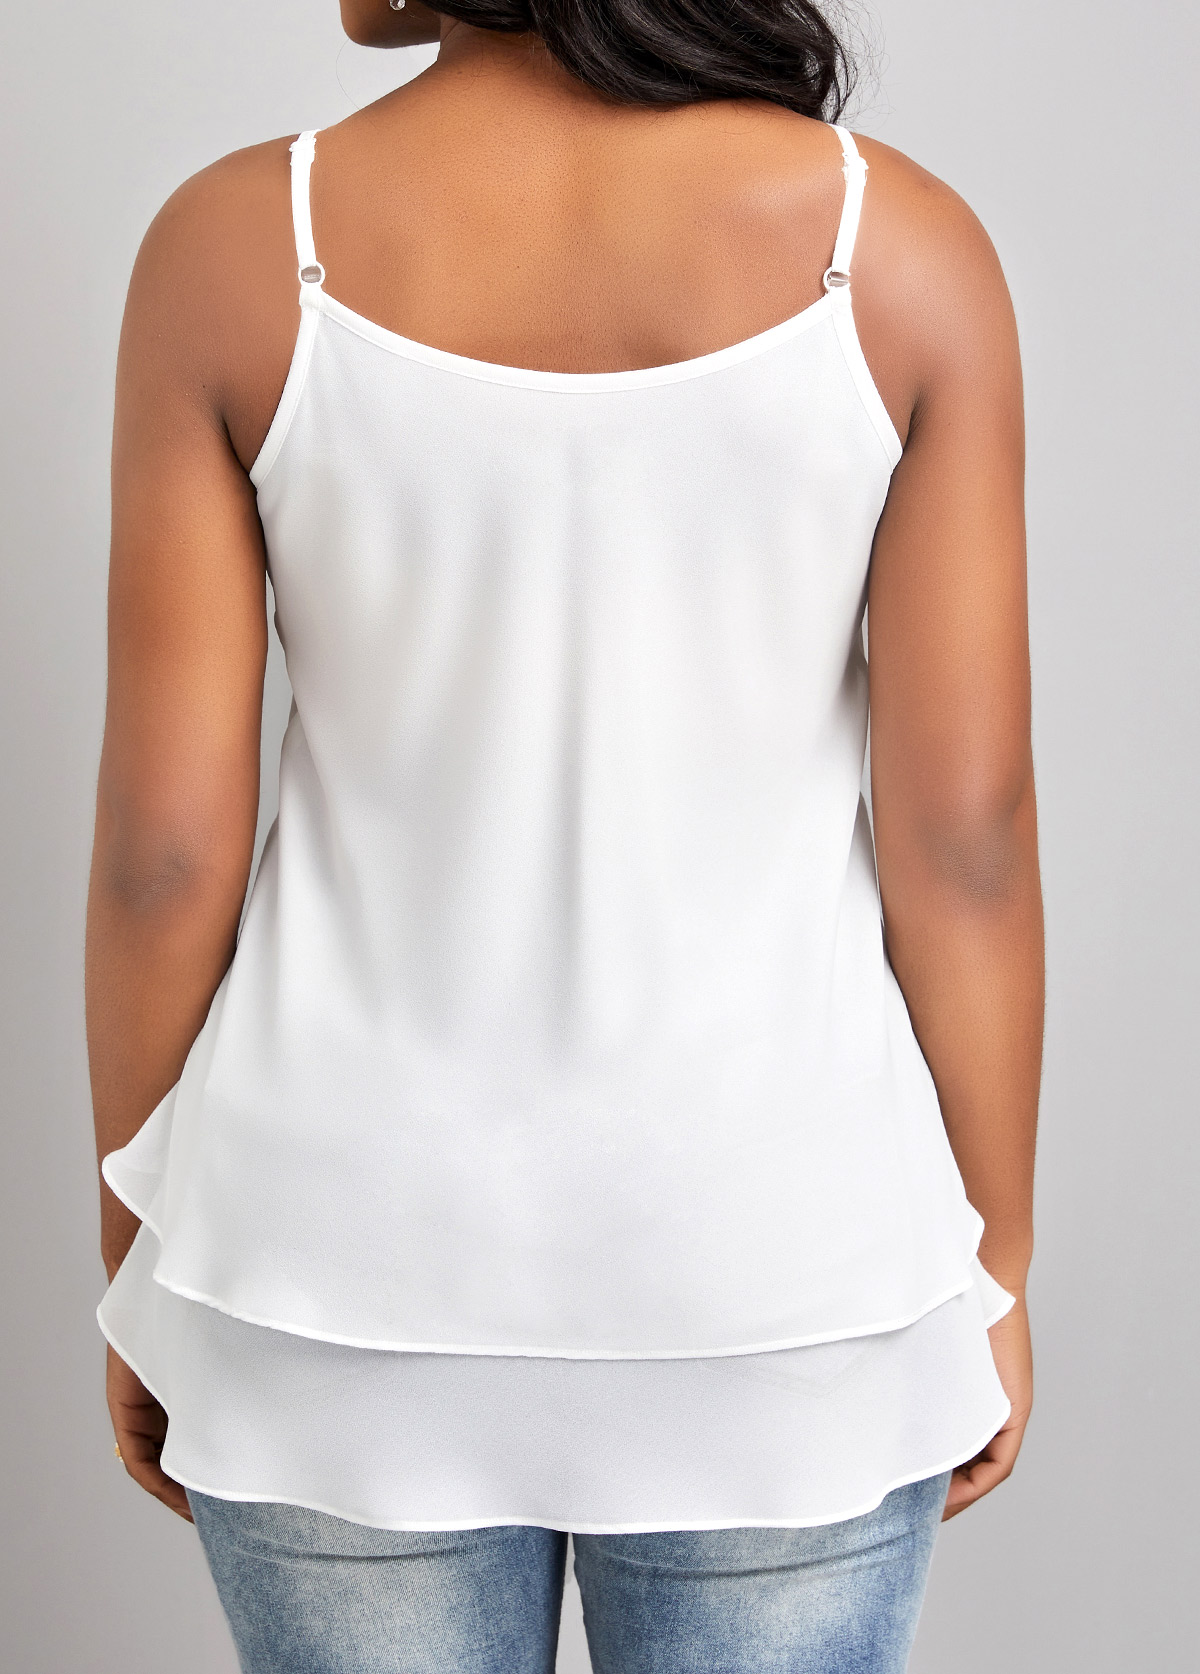 White Ruffle Strappy Scoop Neck Camisole Top